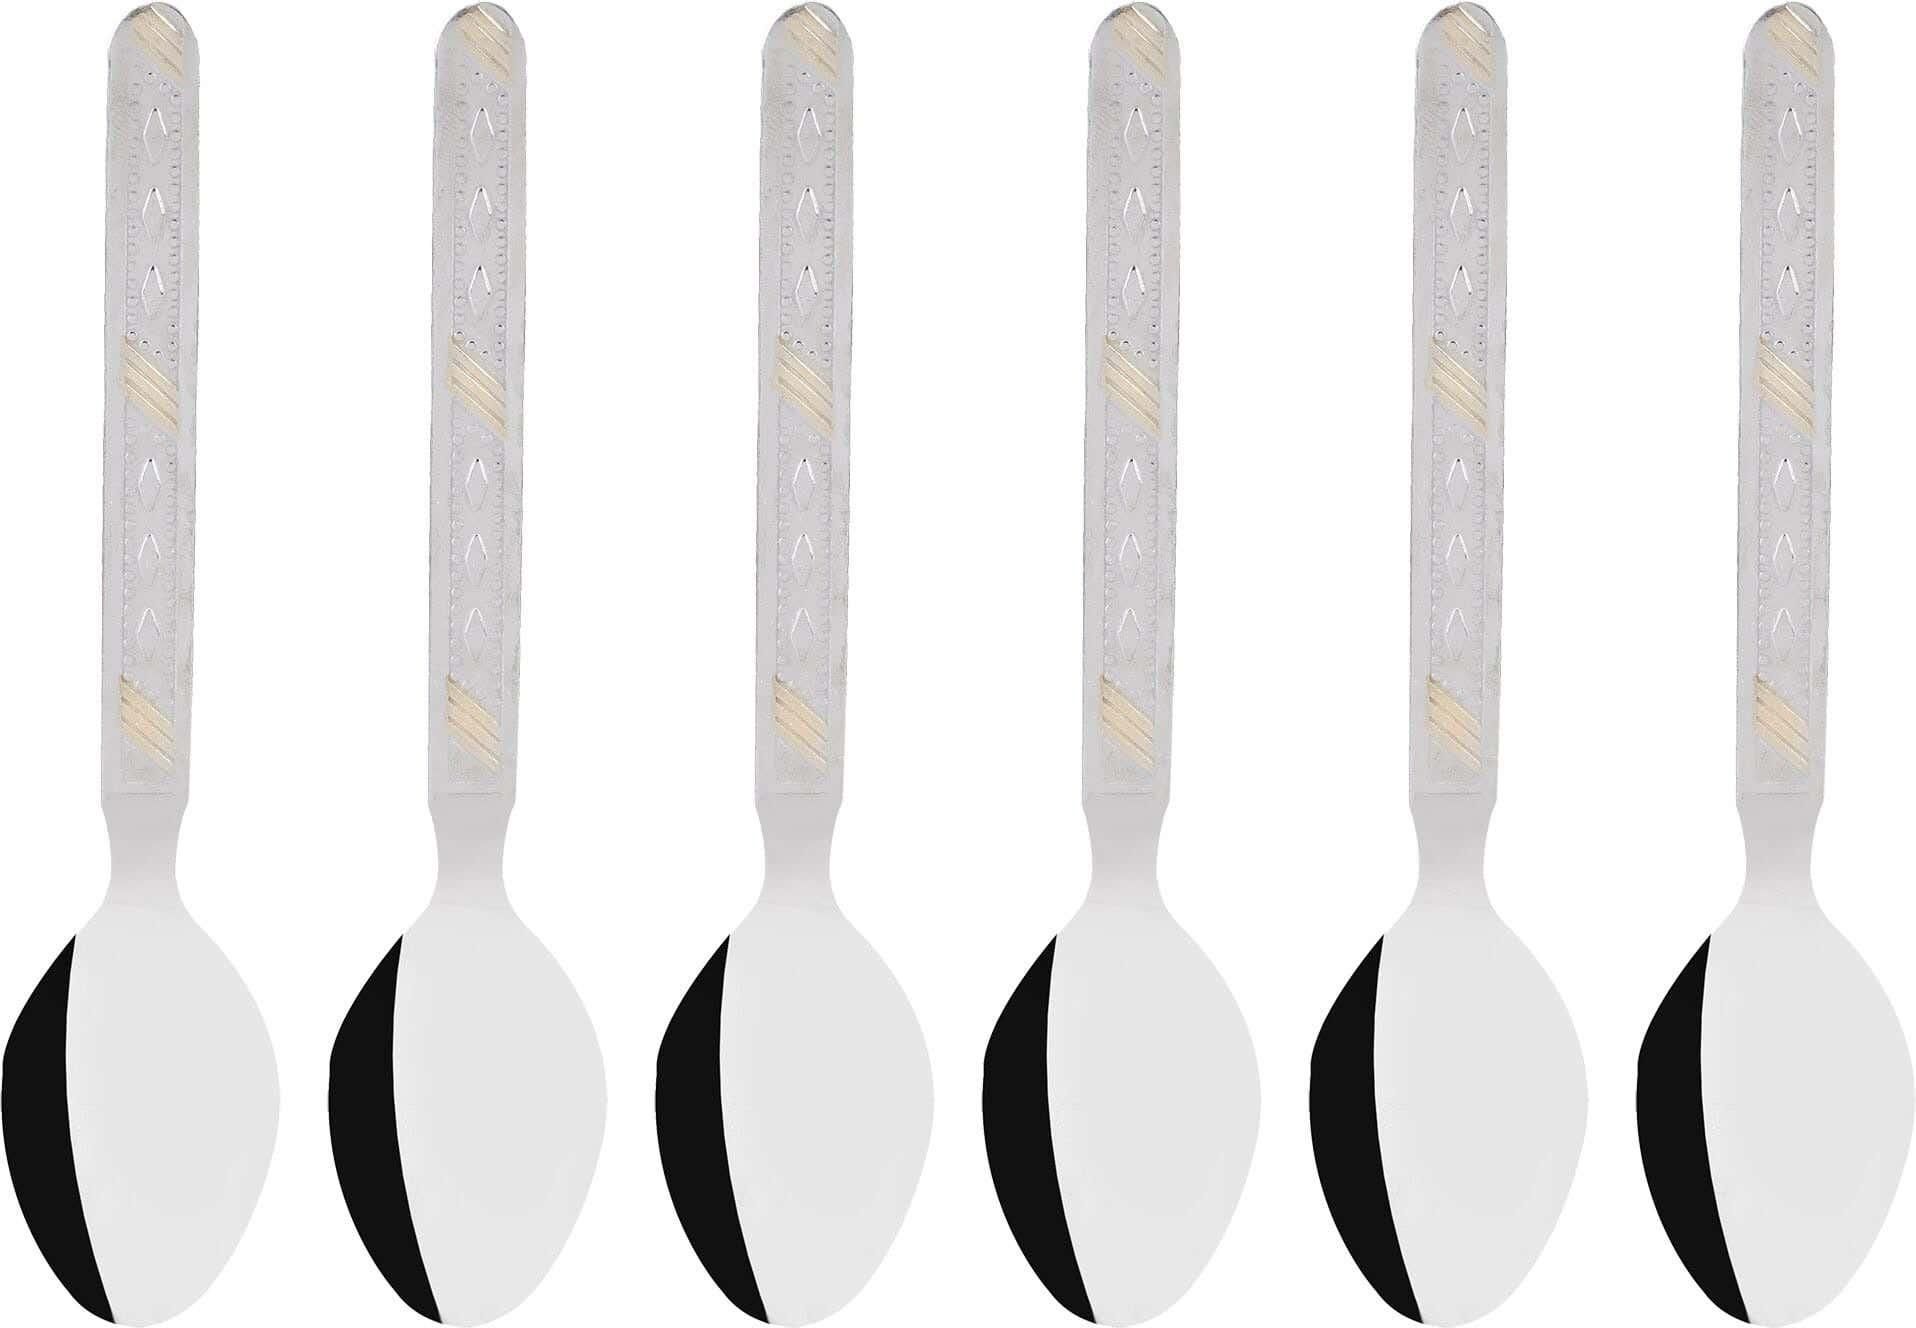 Get El Hoda Stainless Steel Tea Spoons Set, 6 Pieces, 14 cm - Silver Gold with best offers | Raneen.com